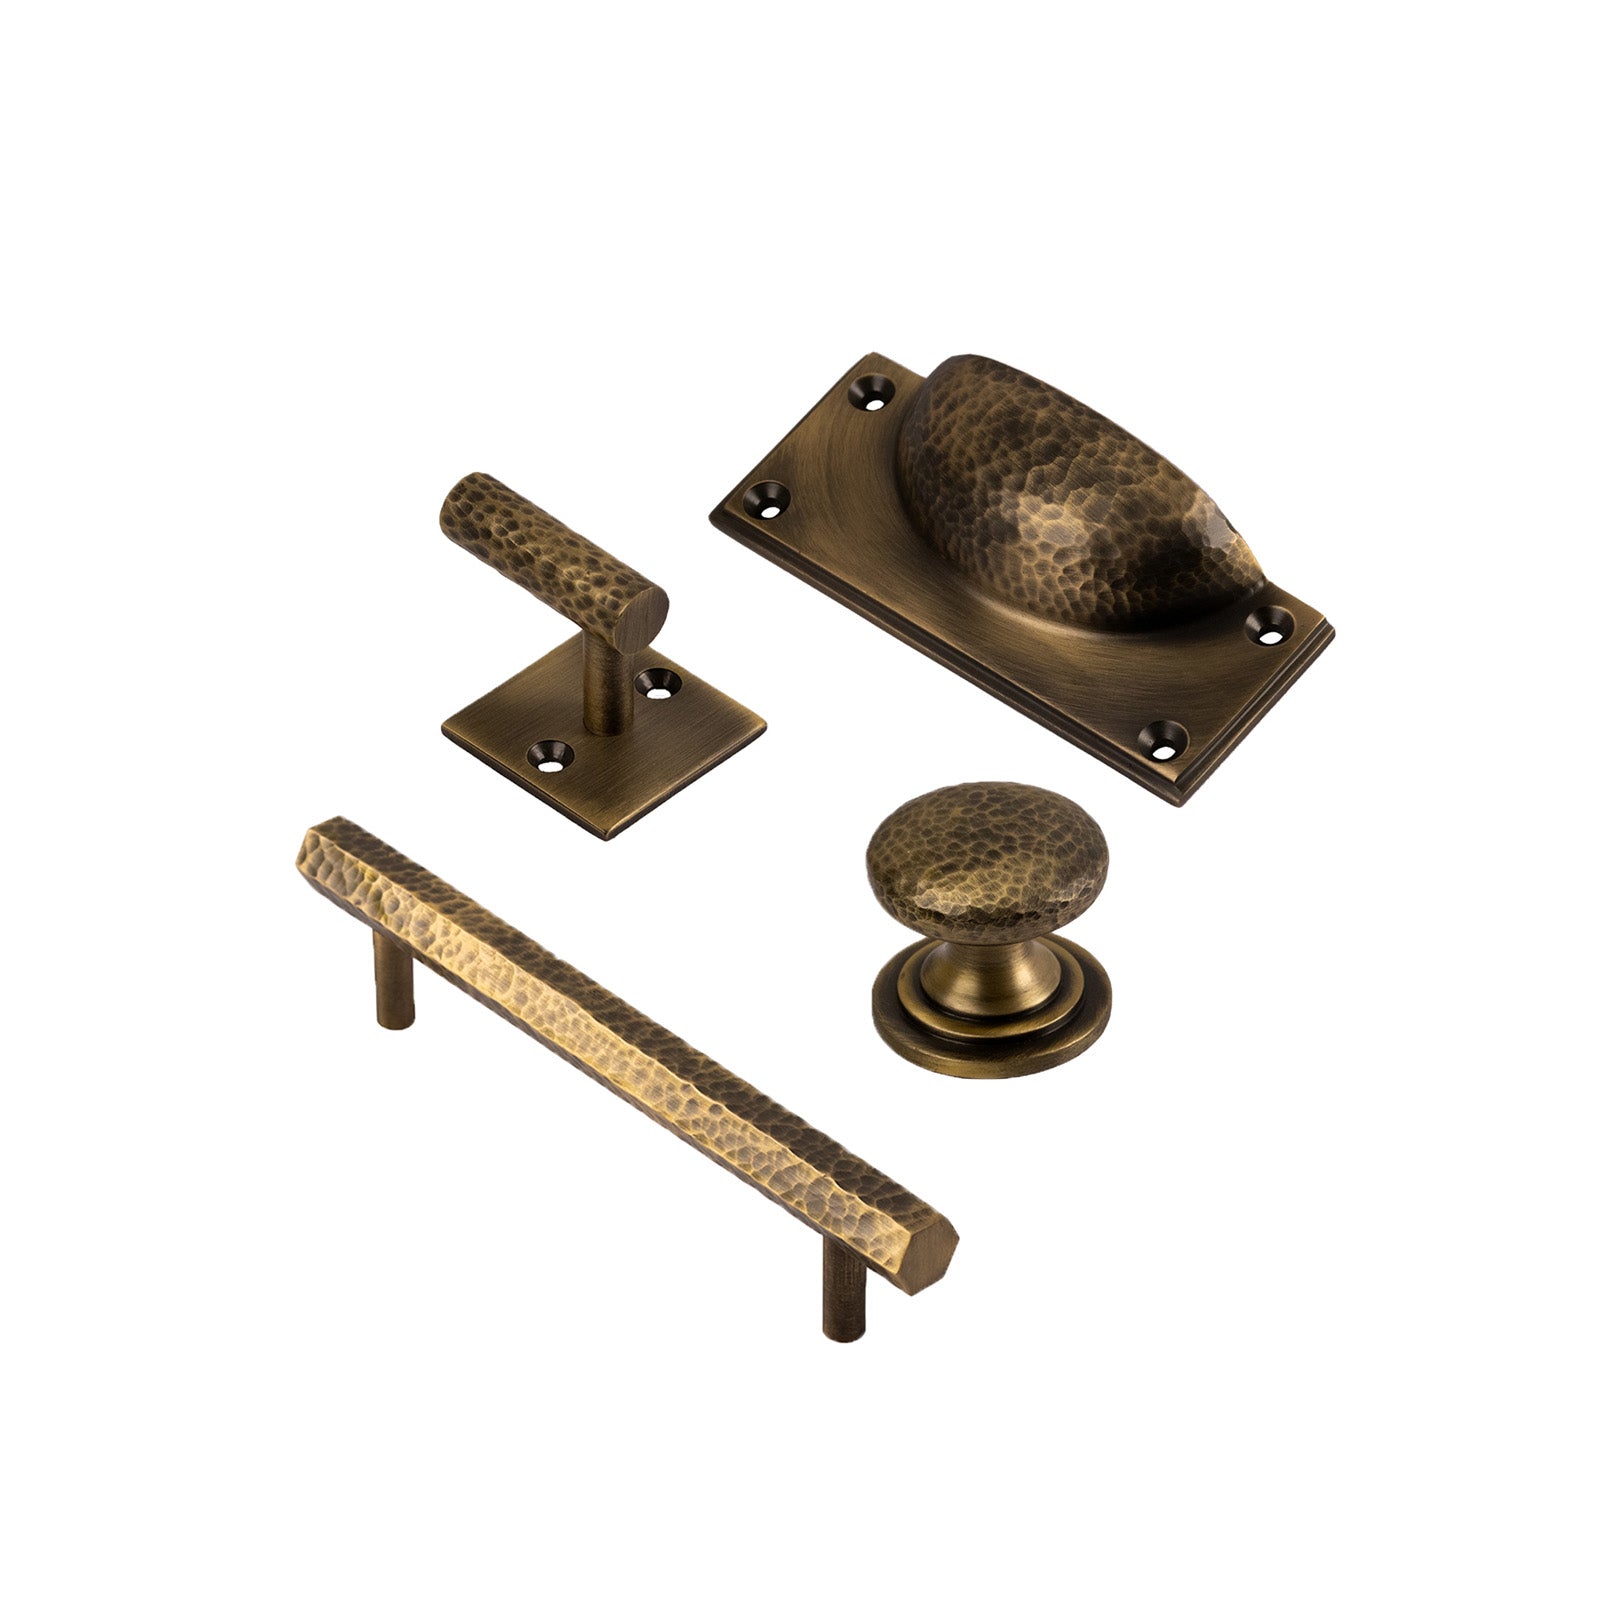 Hammered Double Robe Hook - Antique Brass